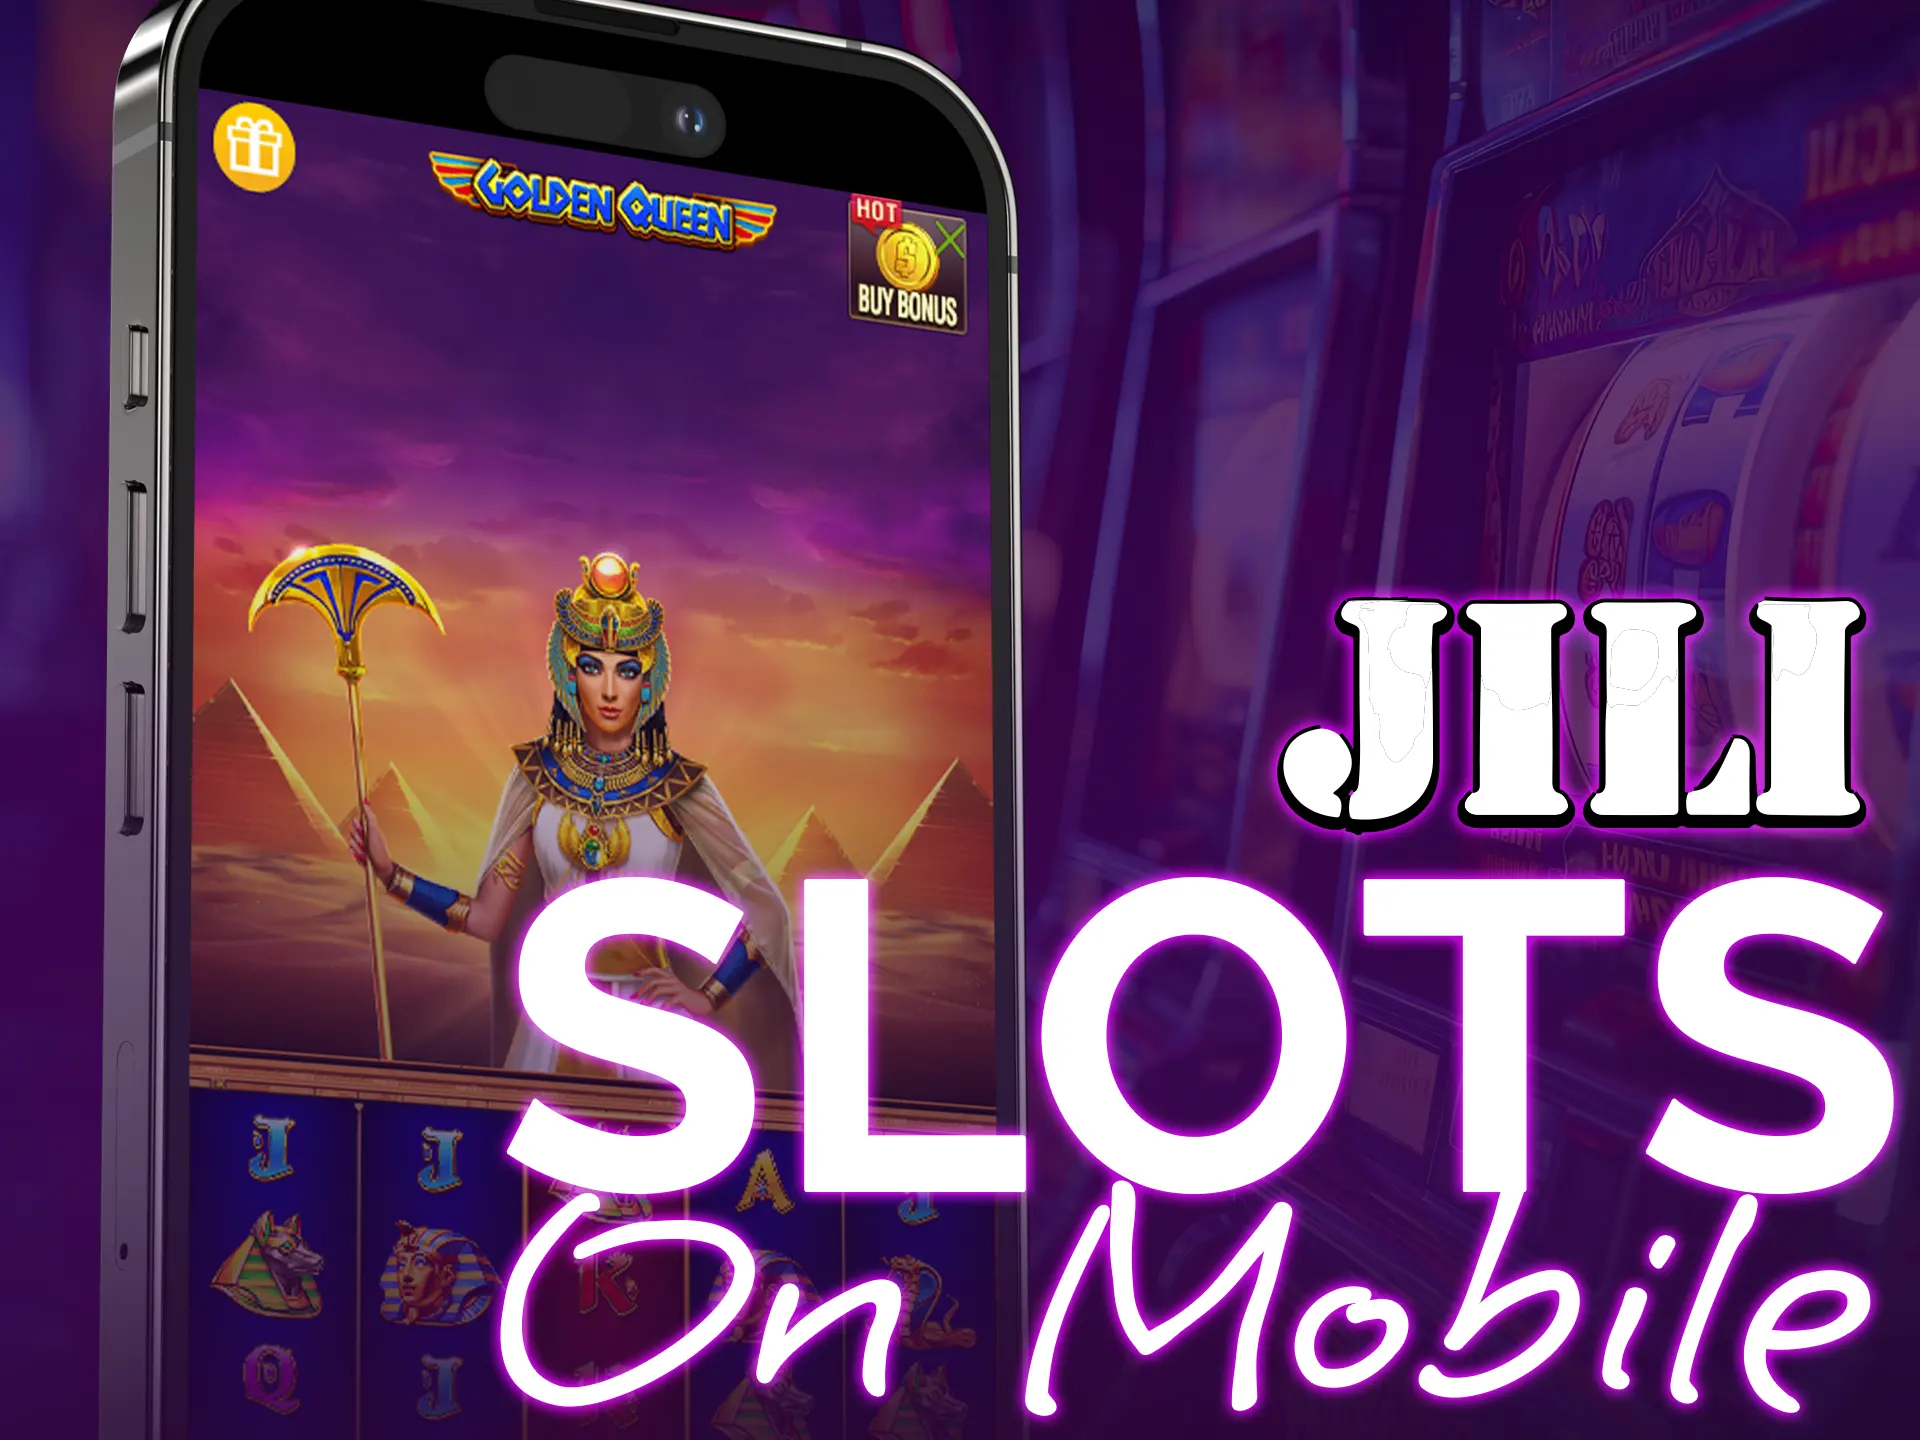 Jili Games giving access for slots on mobile devices.